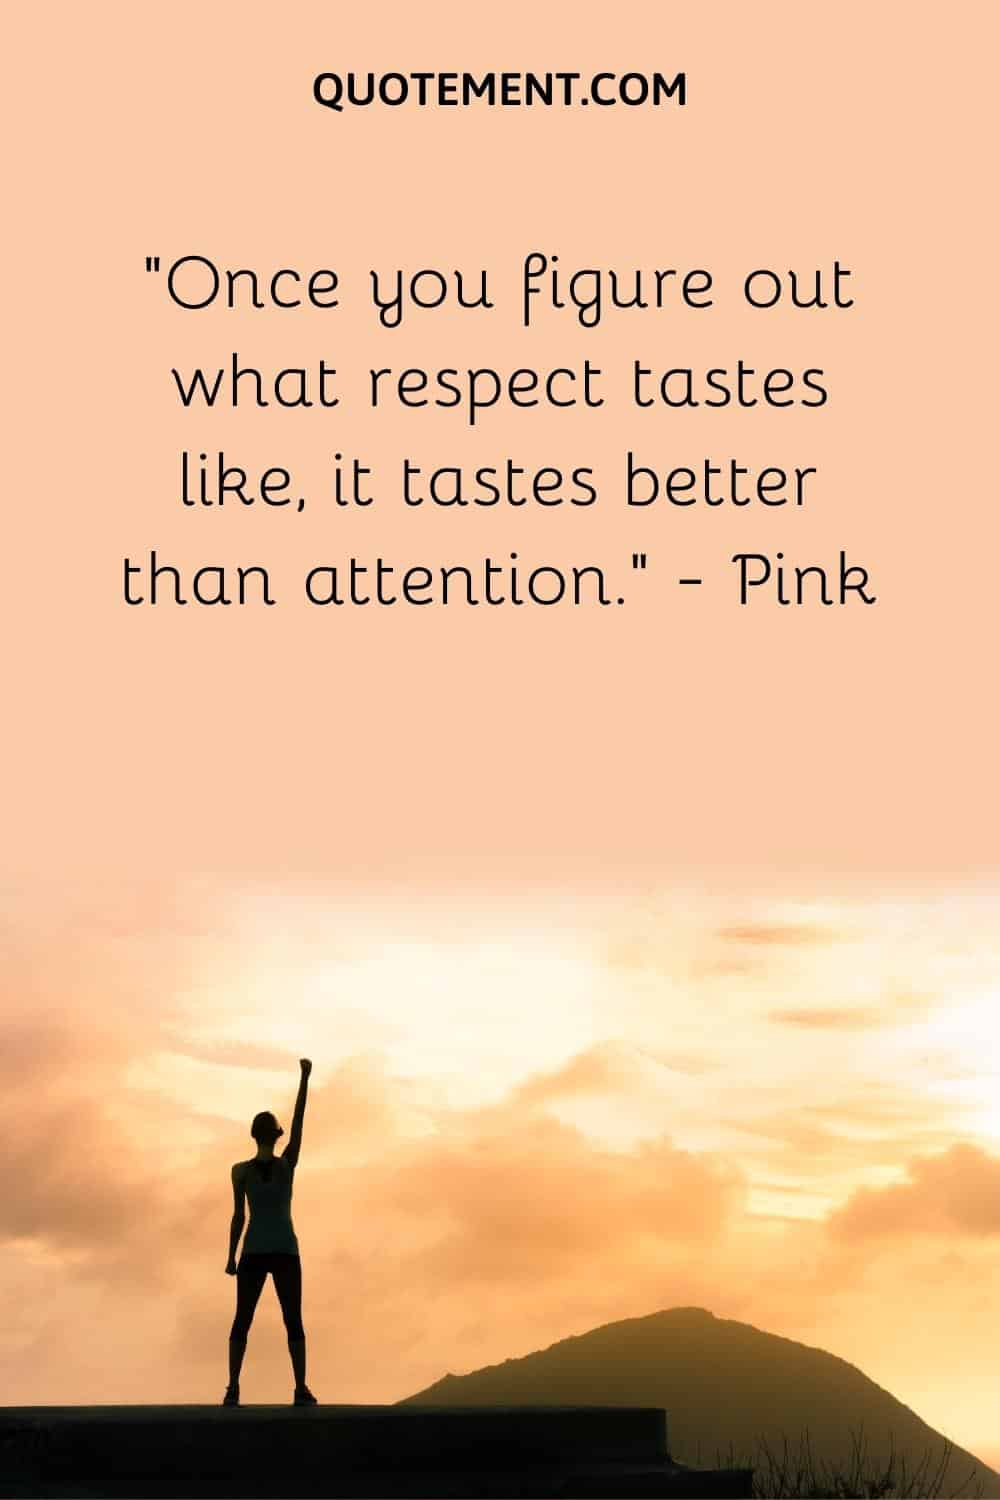 Once you figure out what respect tastes like, it tastes better than attention